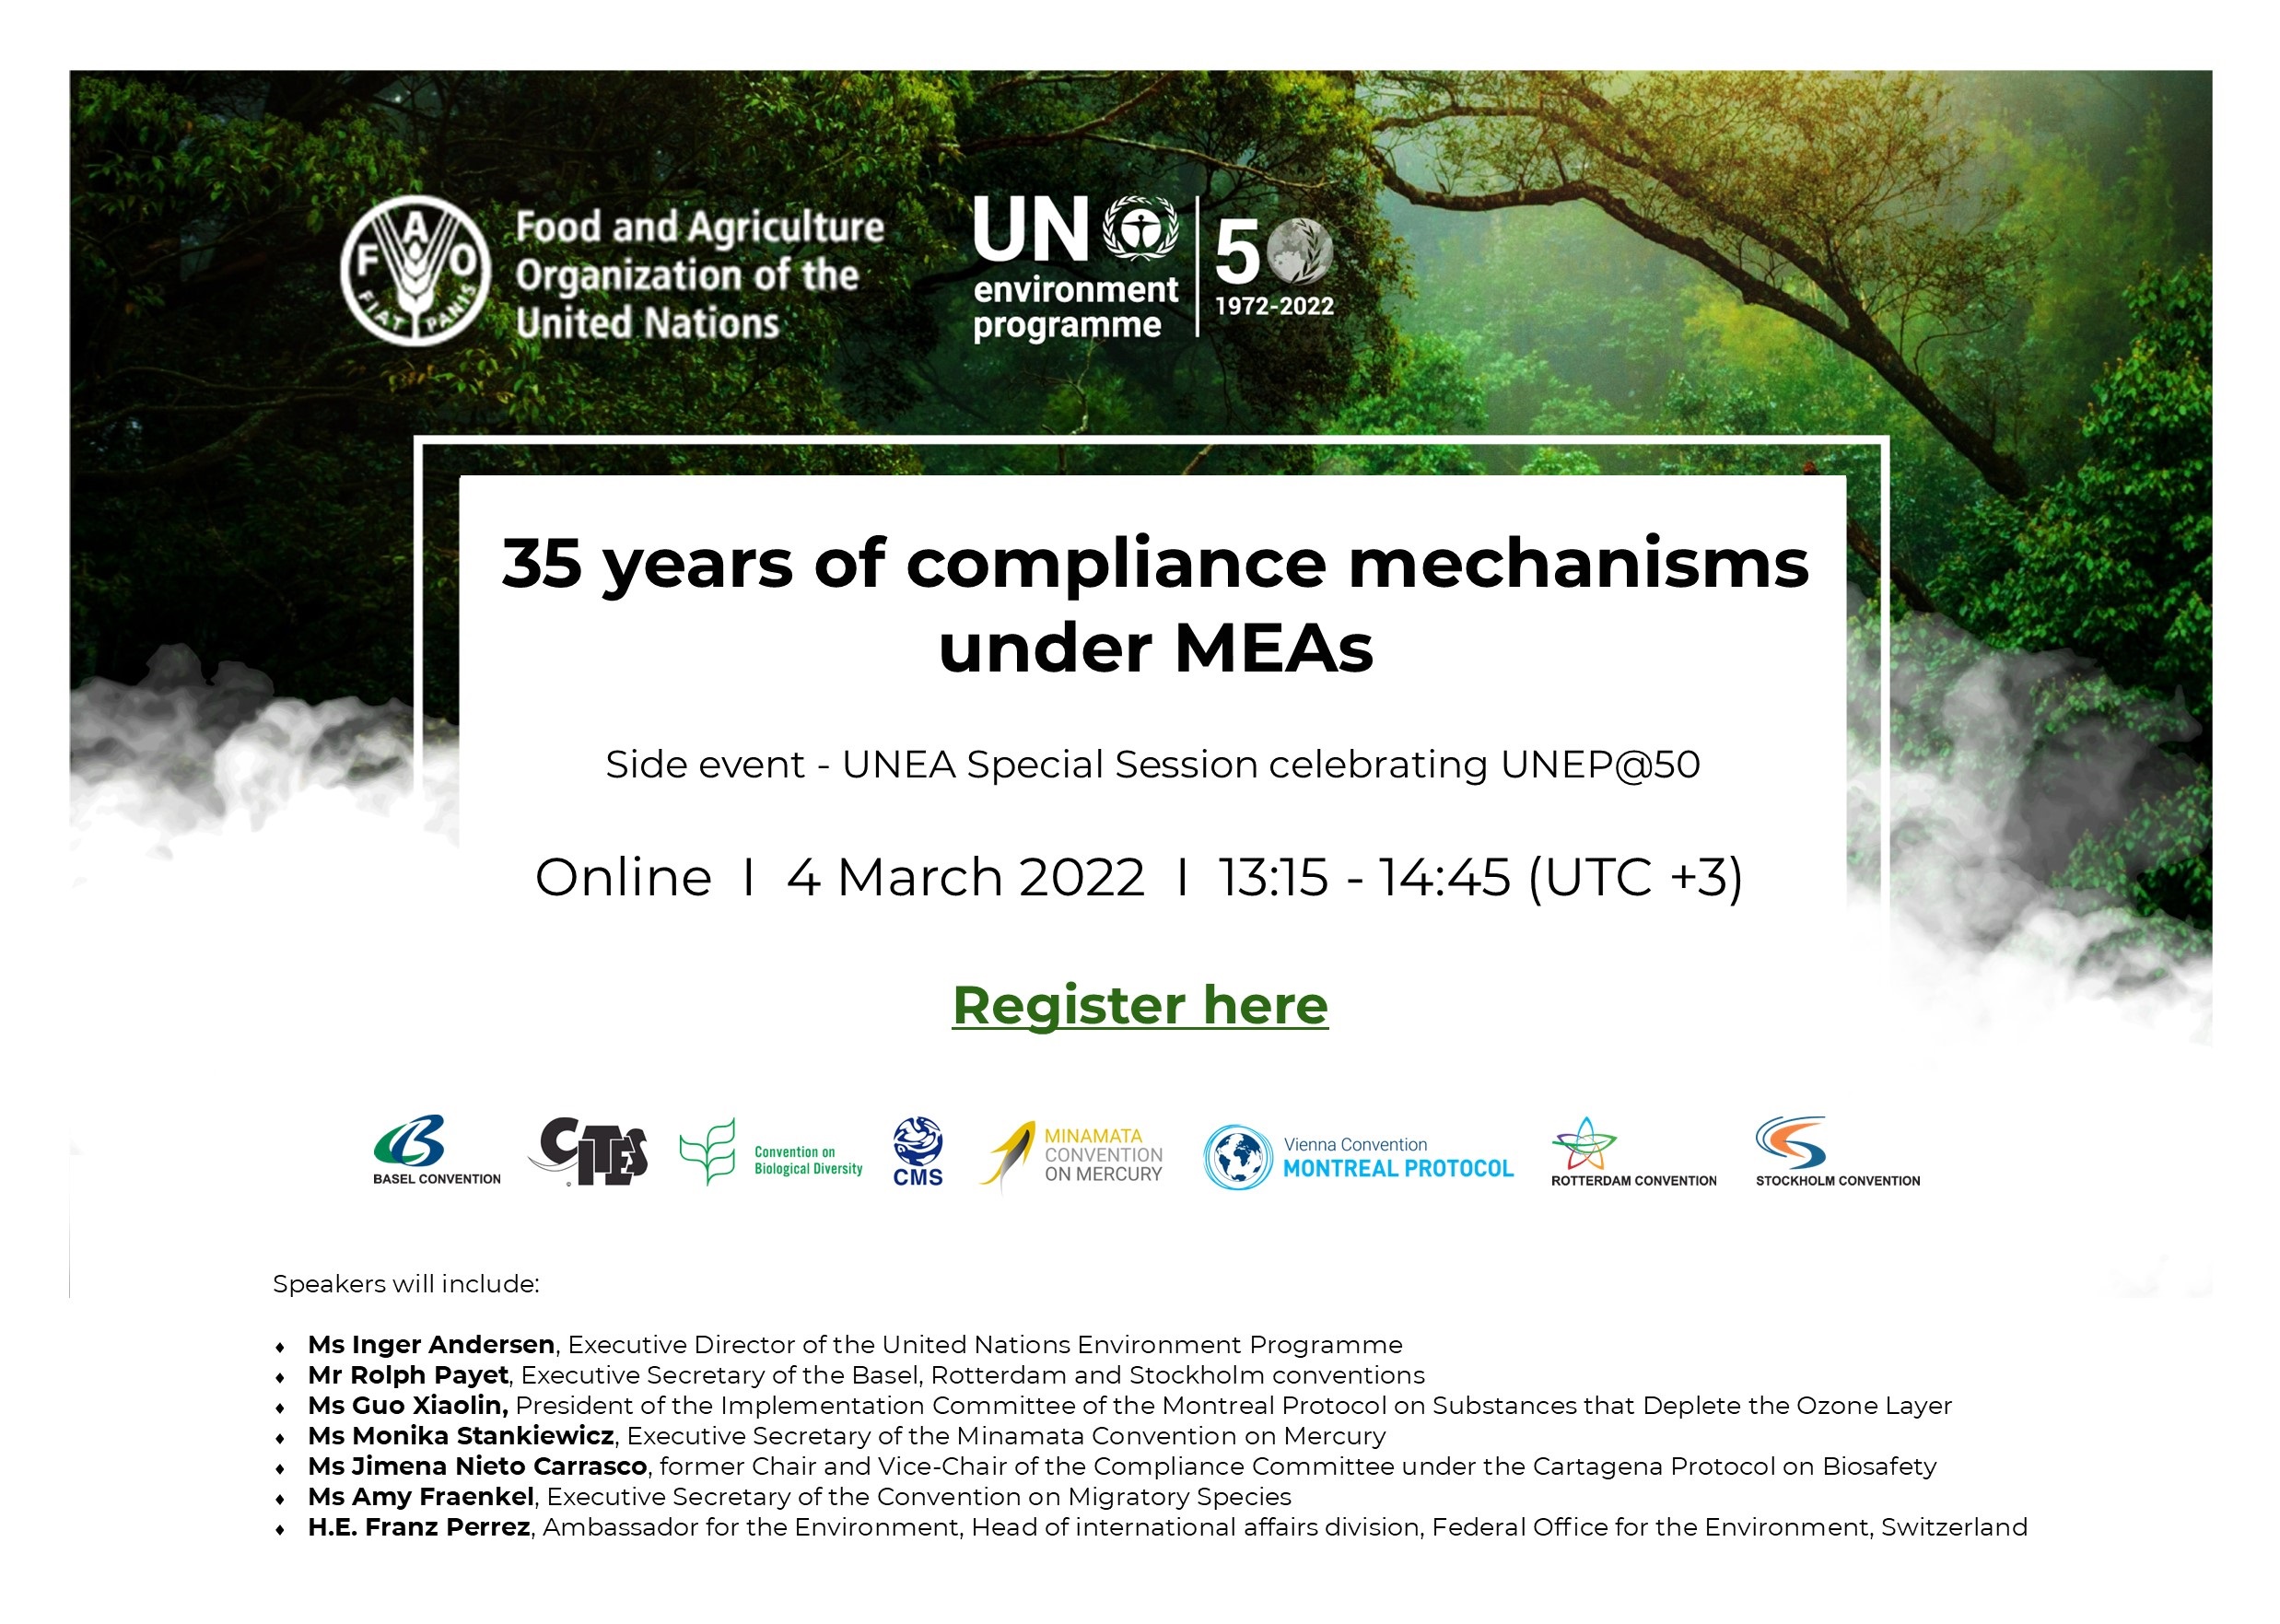 35 years of compliance mechanisms under multilateral environmental agreements – side event during the UNEA Special Session “UNEP@50” - 4/3/2022